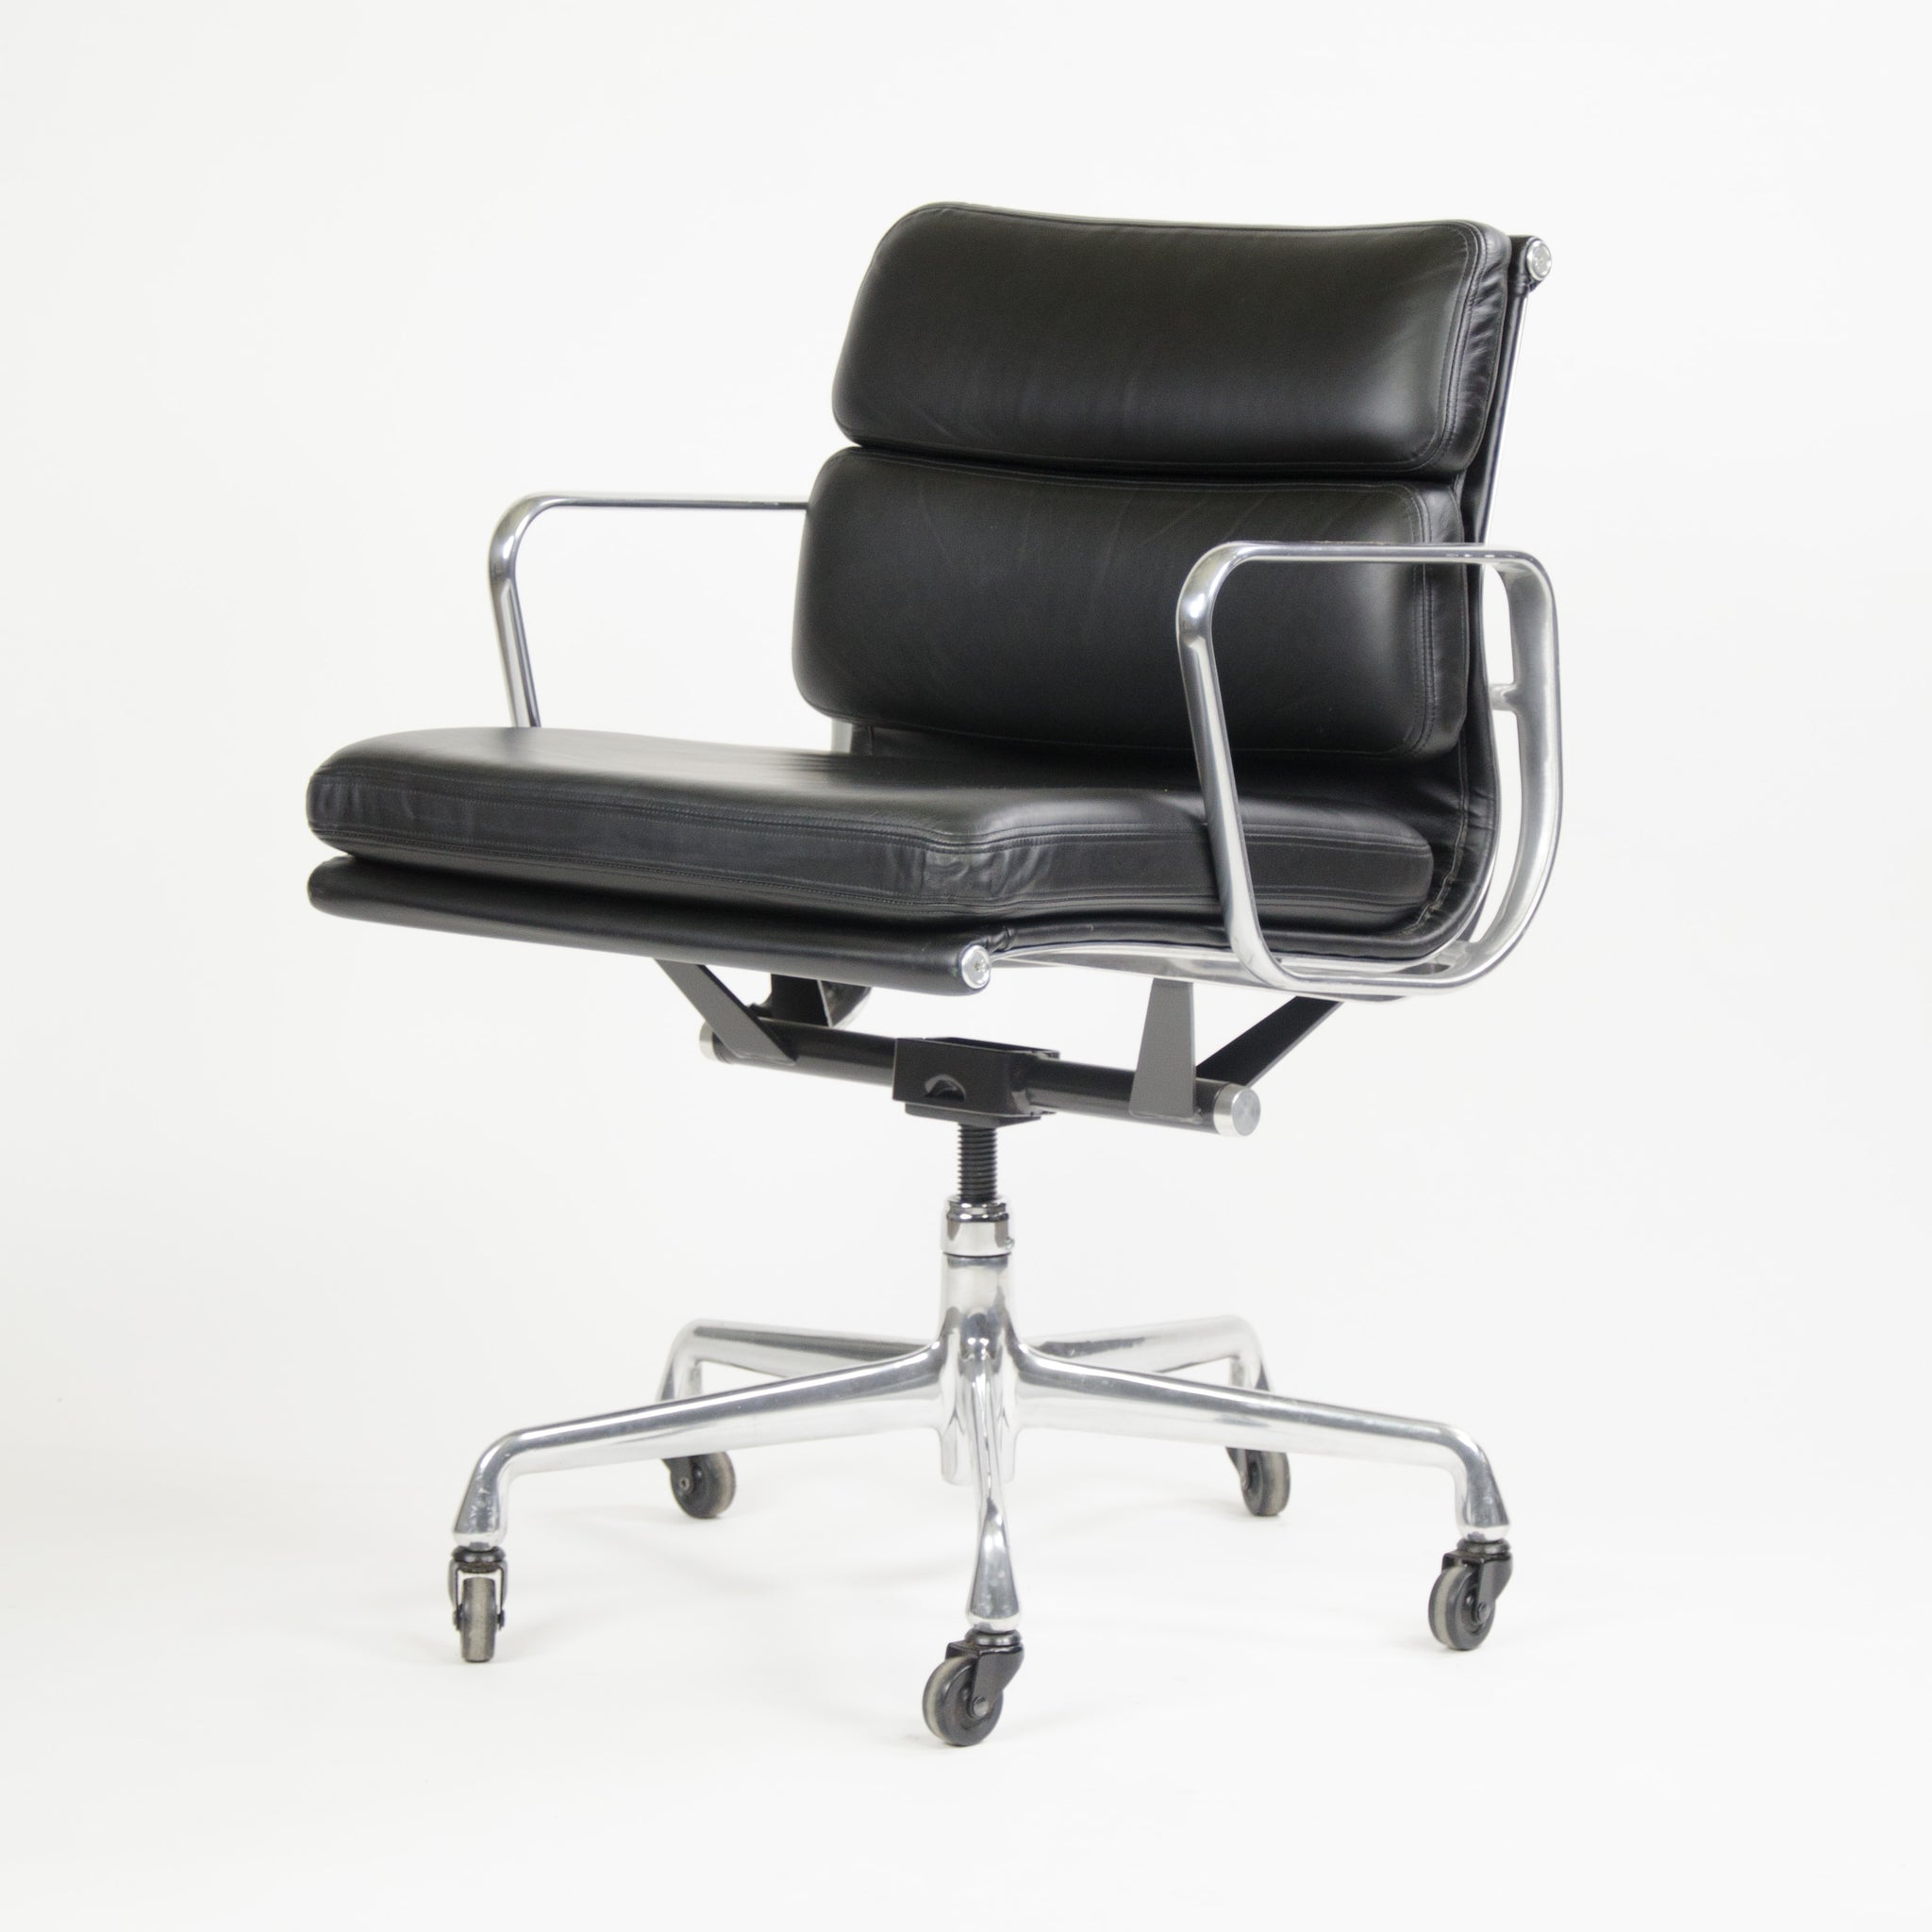 SOLD Herman Miller Eames Soft Pad Aluminum Group Chair Black Leather 2006 MINT